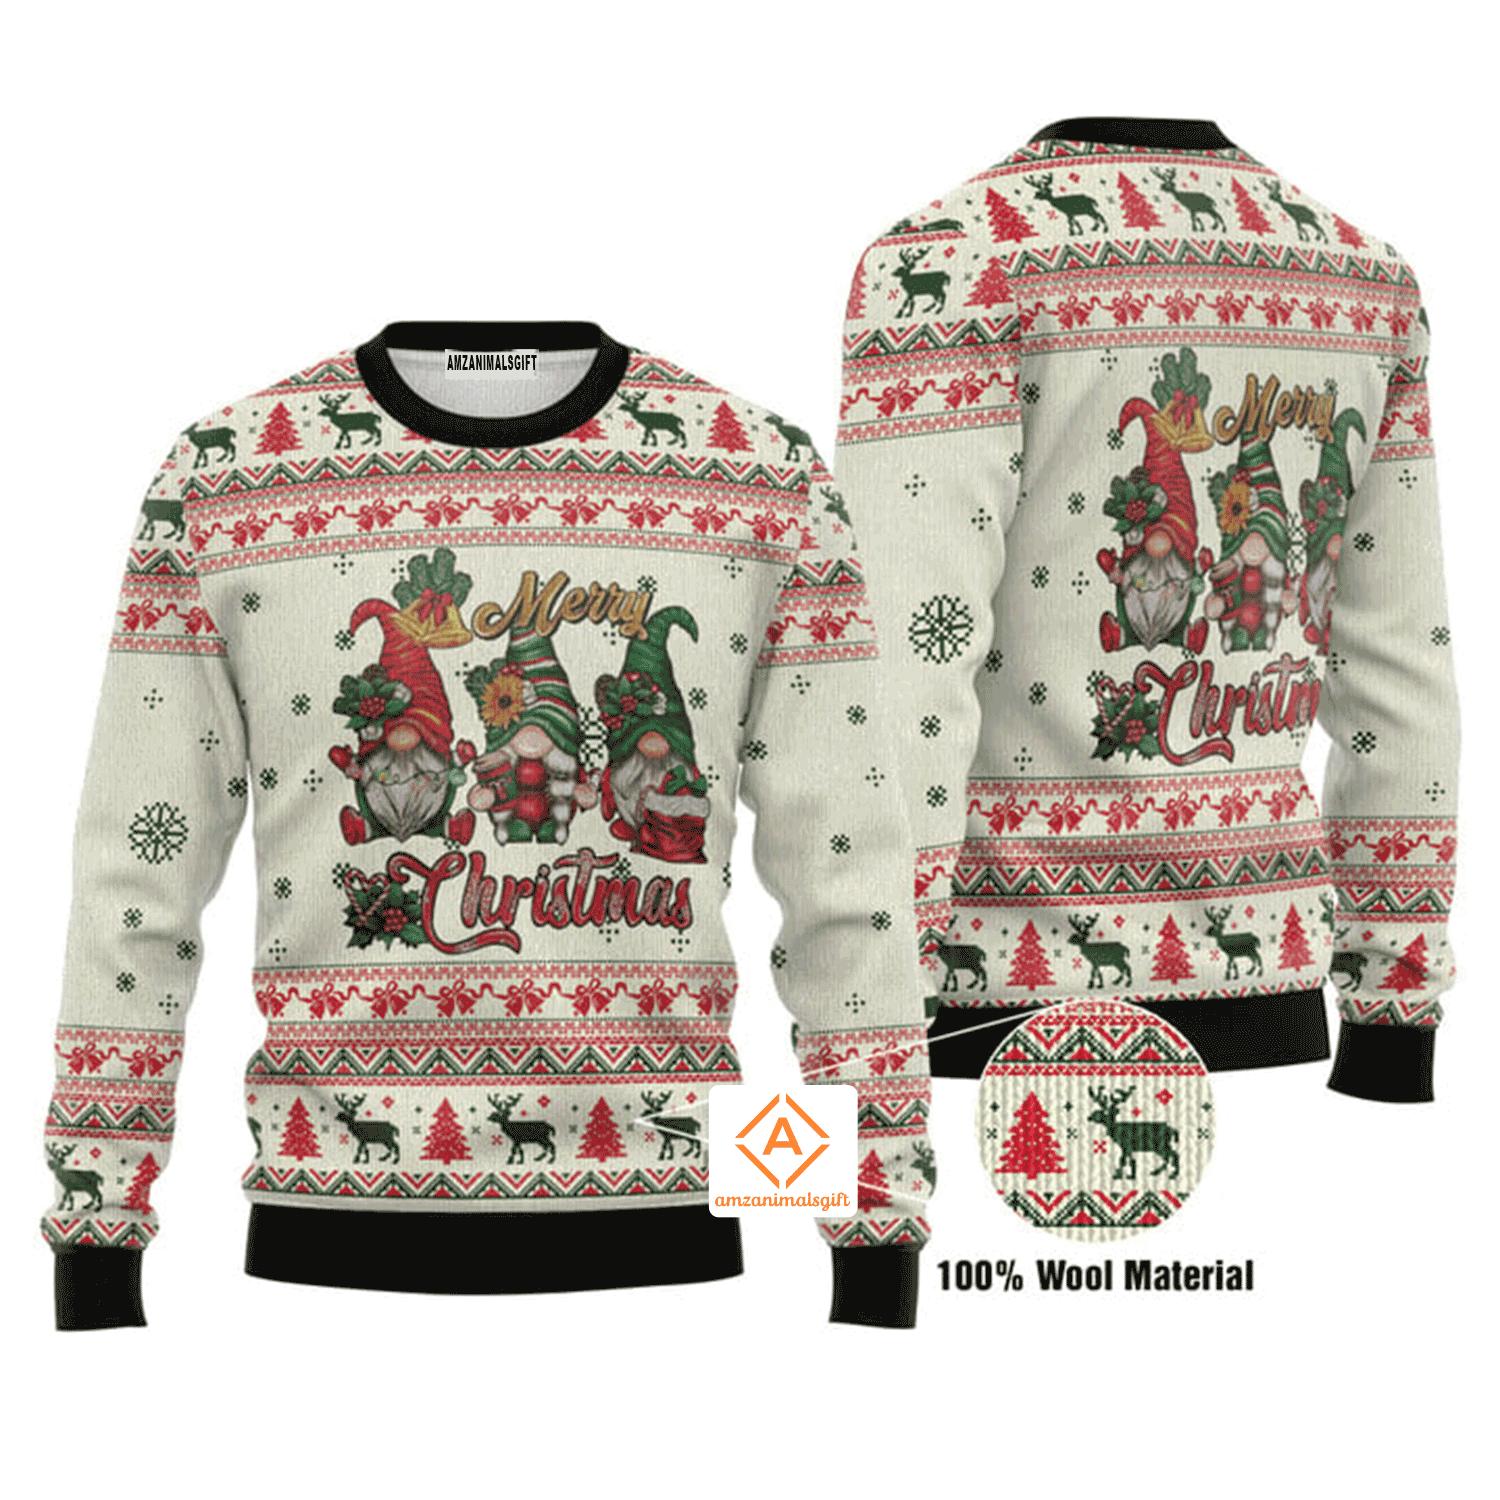 Gromes Let It Snow Christmas Sweater, Ugly Sweater For Men & Women, Perfect Outfit For Christmas New Year Autumn Winter